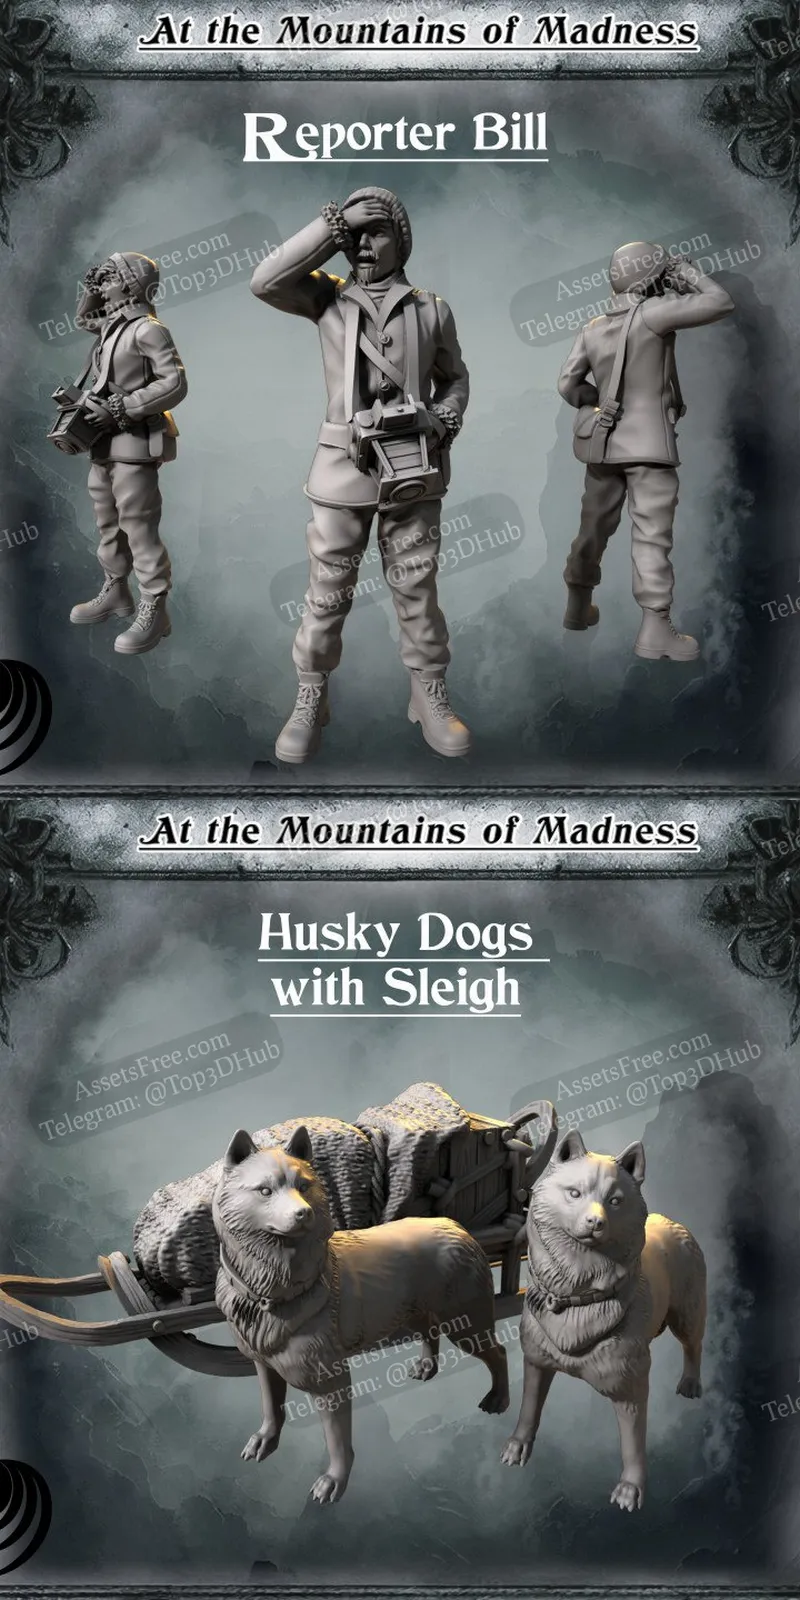 Reporter Bill and Husky Dogs with Sleigh - At the Mountains of Madness